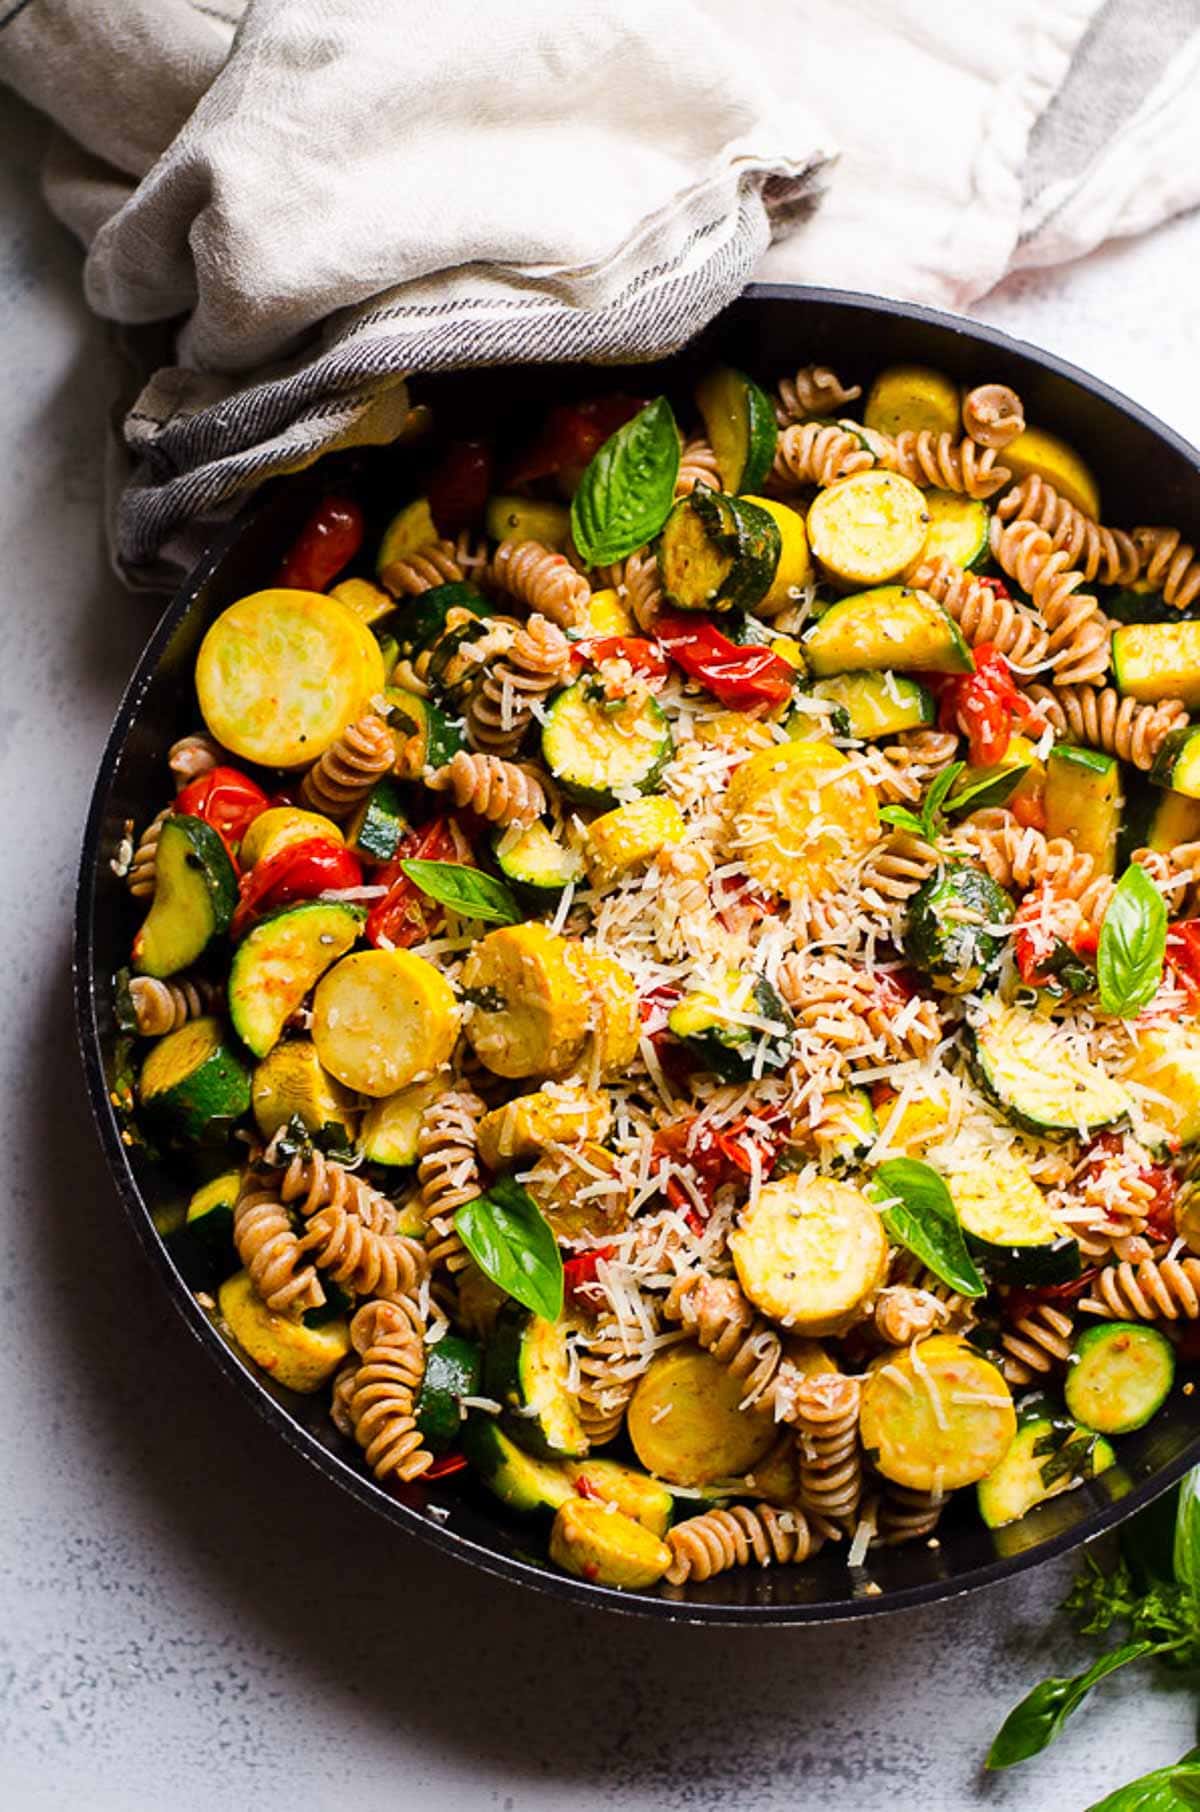 Pasta with zucchini and tomatoes garnish with Parmesan cheese in cast iron skillet.